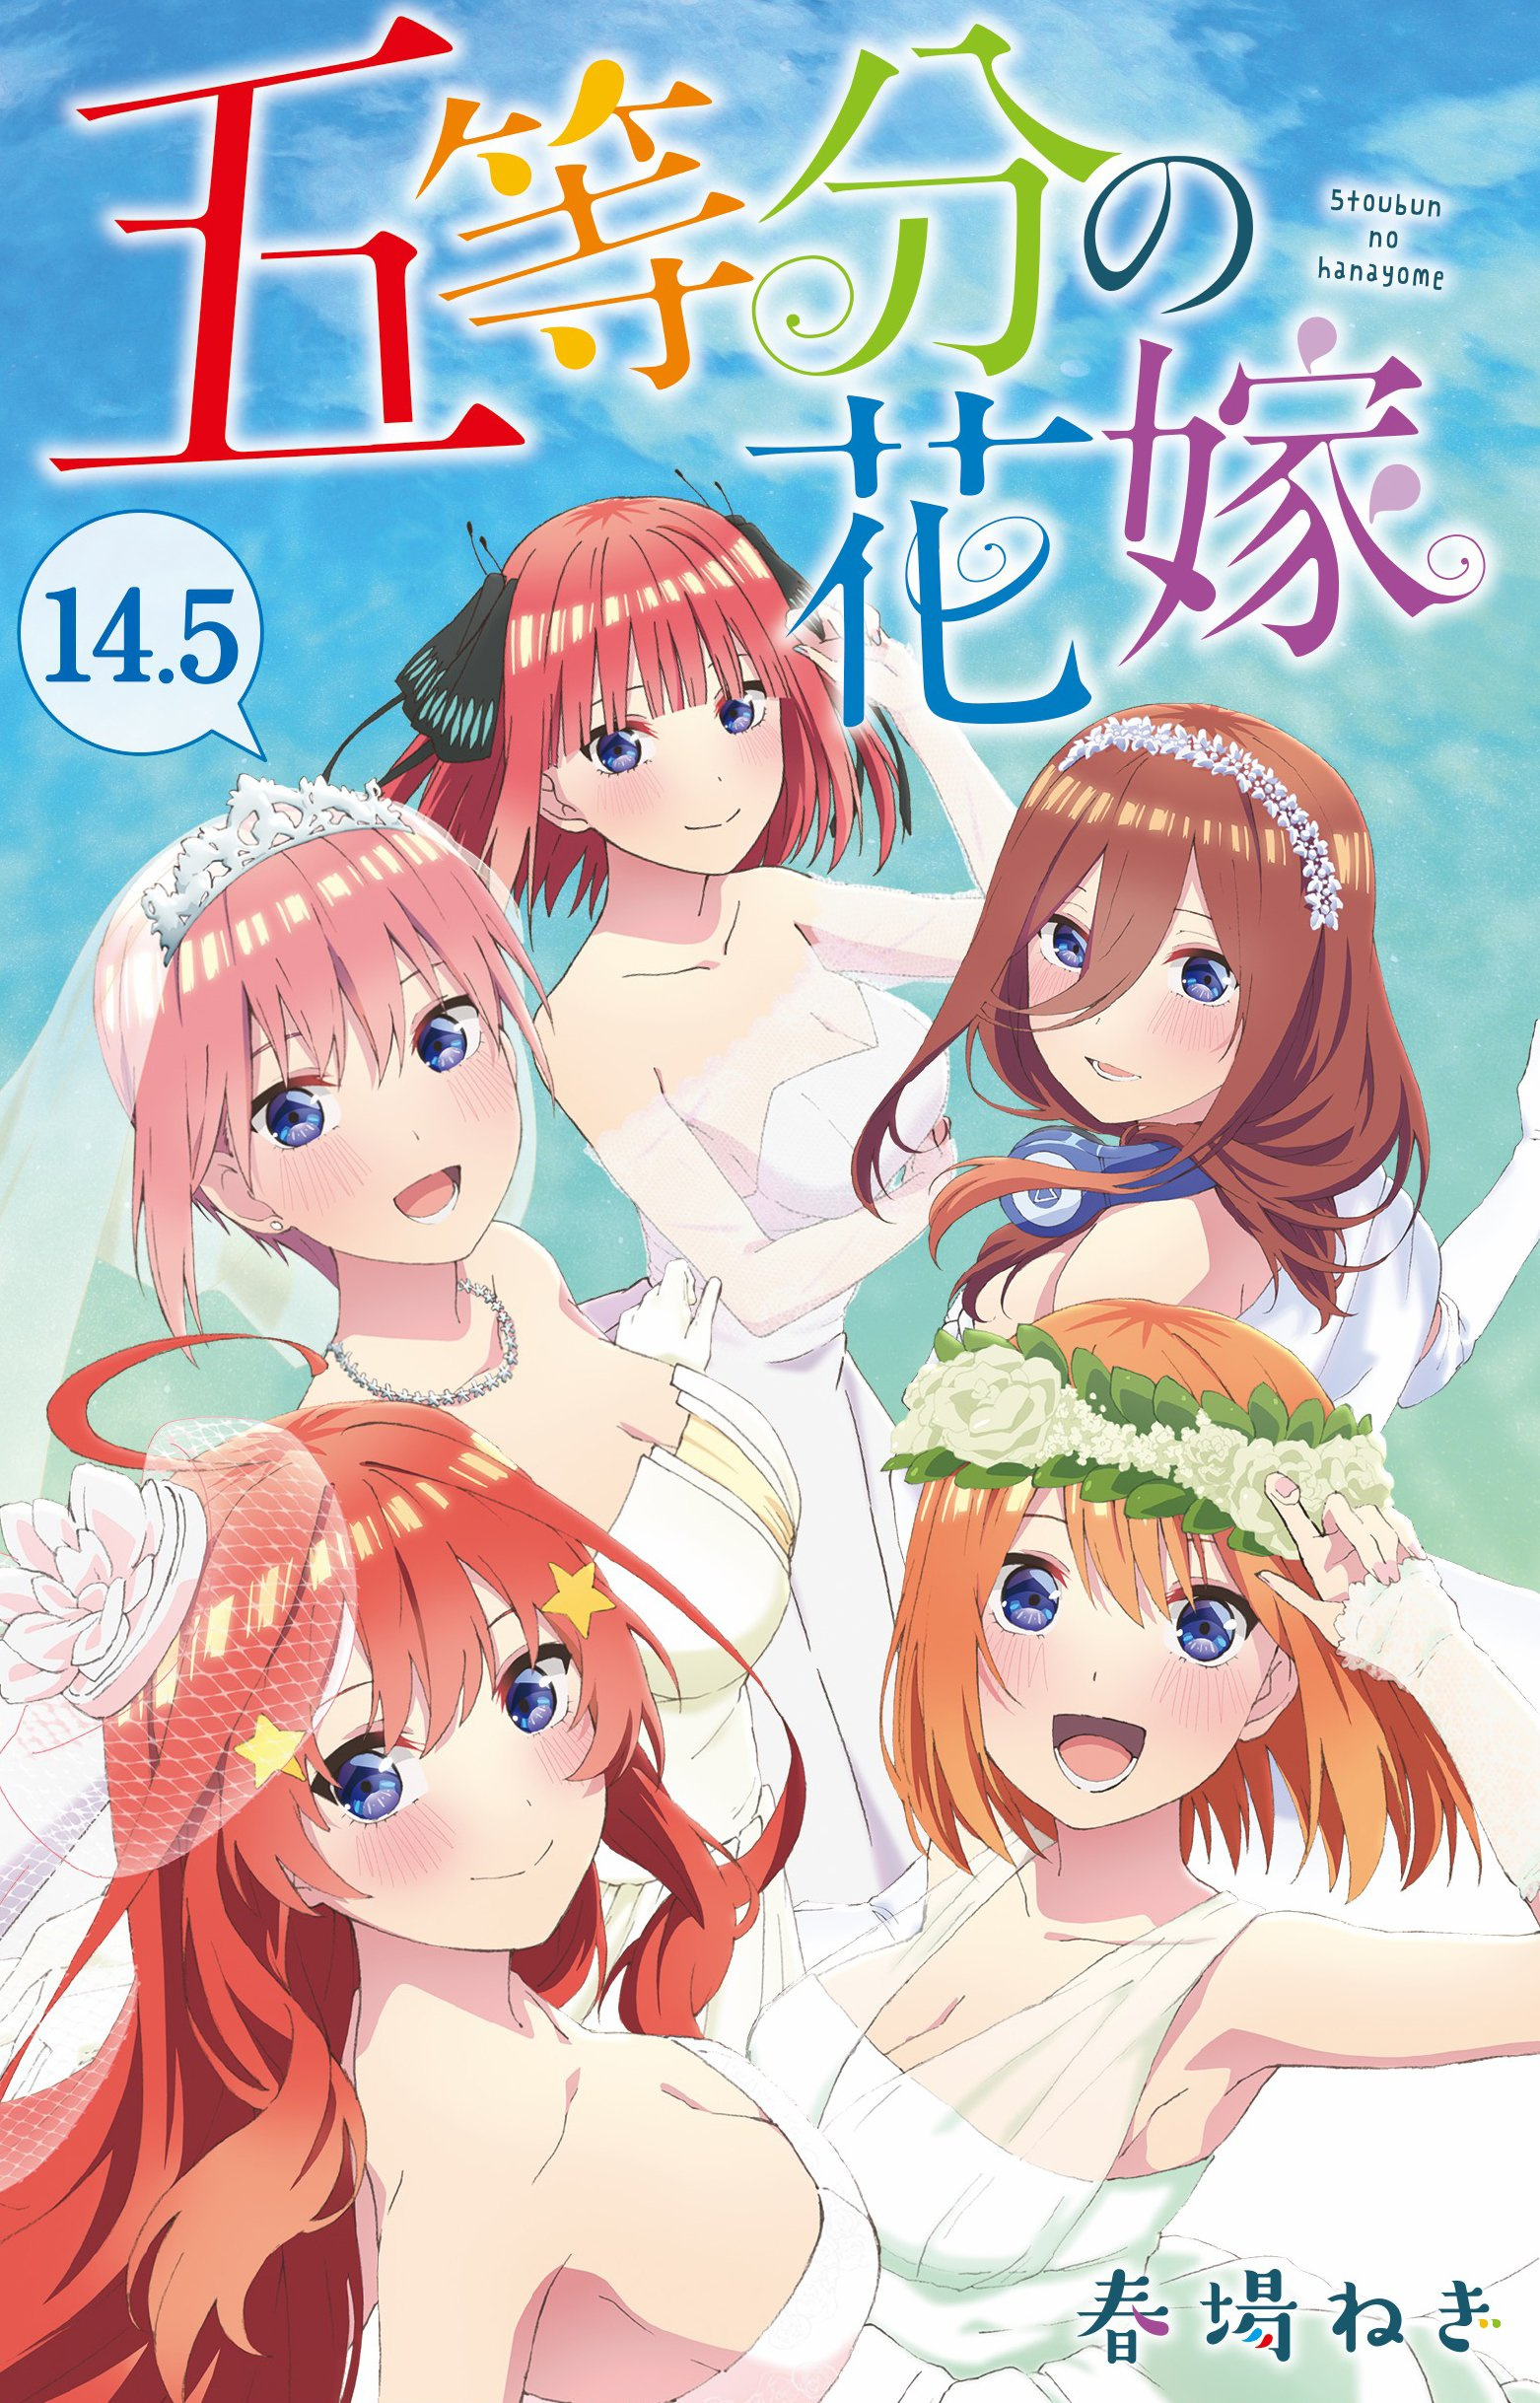 Quintessential Quintuplets Movie Earns $3 Million During the Opening  Weekend - Anime Corner